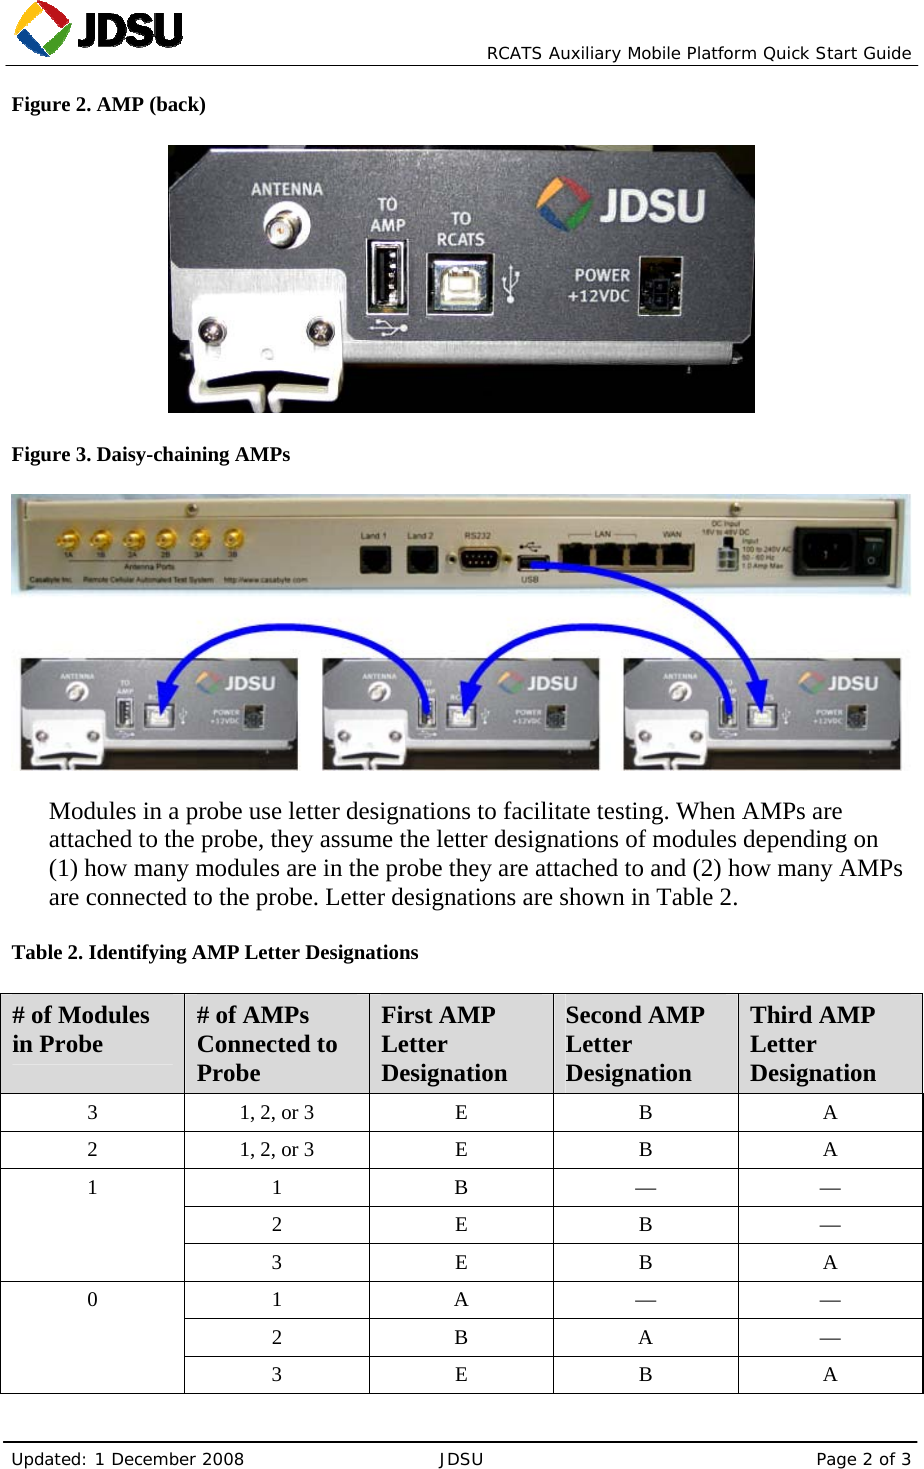   RCATS Auxiliary Mobile Platform Quick Start Guide Updated: 1 December 2008  JDSU  Page 2 of 3 Figure 2. AMP (back)  Figure 3. Daisy-chaining AMPs  Modules in a probe use letter designations to facilitate testing. When AMPs are attached to the probe, they assume the letter designations of modules depending on (1) how many modules are in the probe they are attached to and (2) how many AMPs are connected to the probe. Letter designations are shown in Table 2. Table 2. Identifying AMP Letter Designations # of Modules in Probe  # of AMPs Connected to Probe First AMP Letter Designation Second AMP Letter Designation Third AMP Letter Designation 3  1, 2, or 3  E  B  A 2  1, 2, or 3  E  B  A 1 B — — 2 E B — 1 3 E B A 1 A — — 2 B A — 0 3 E B A 